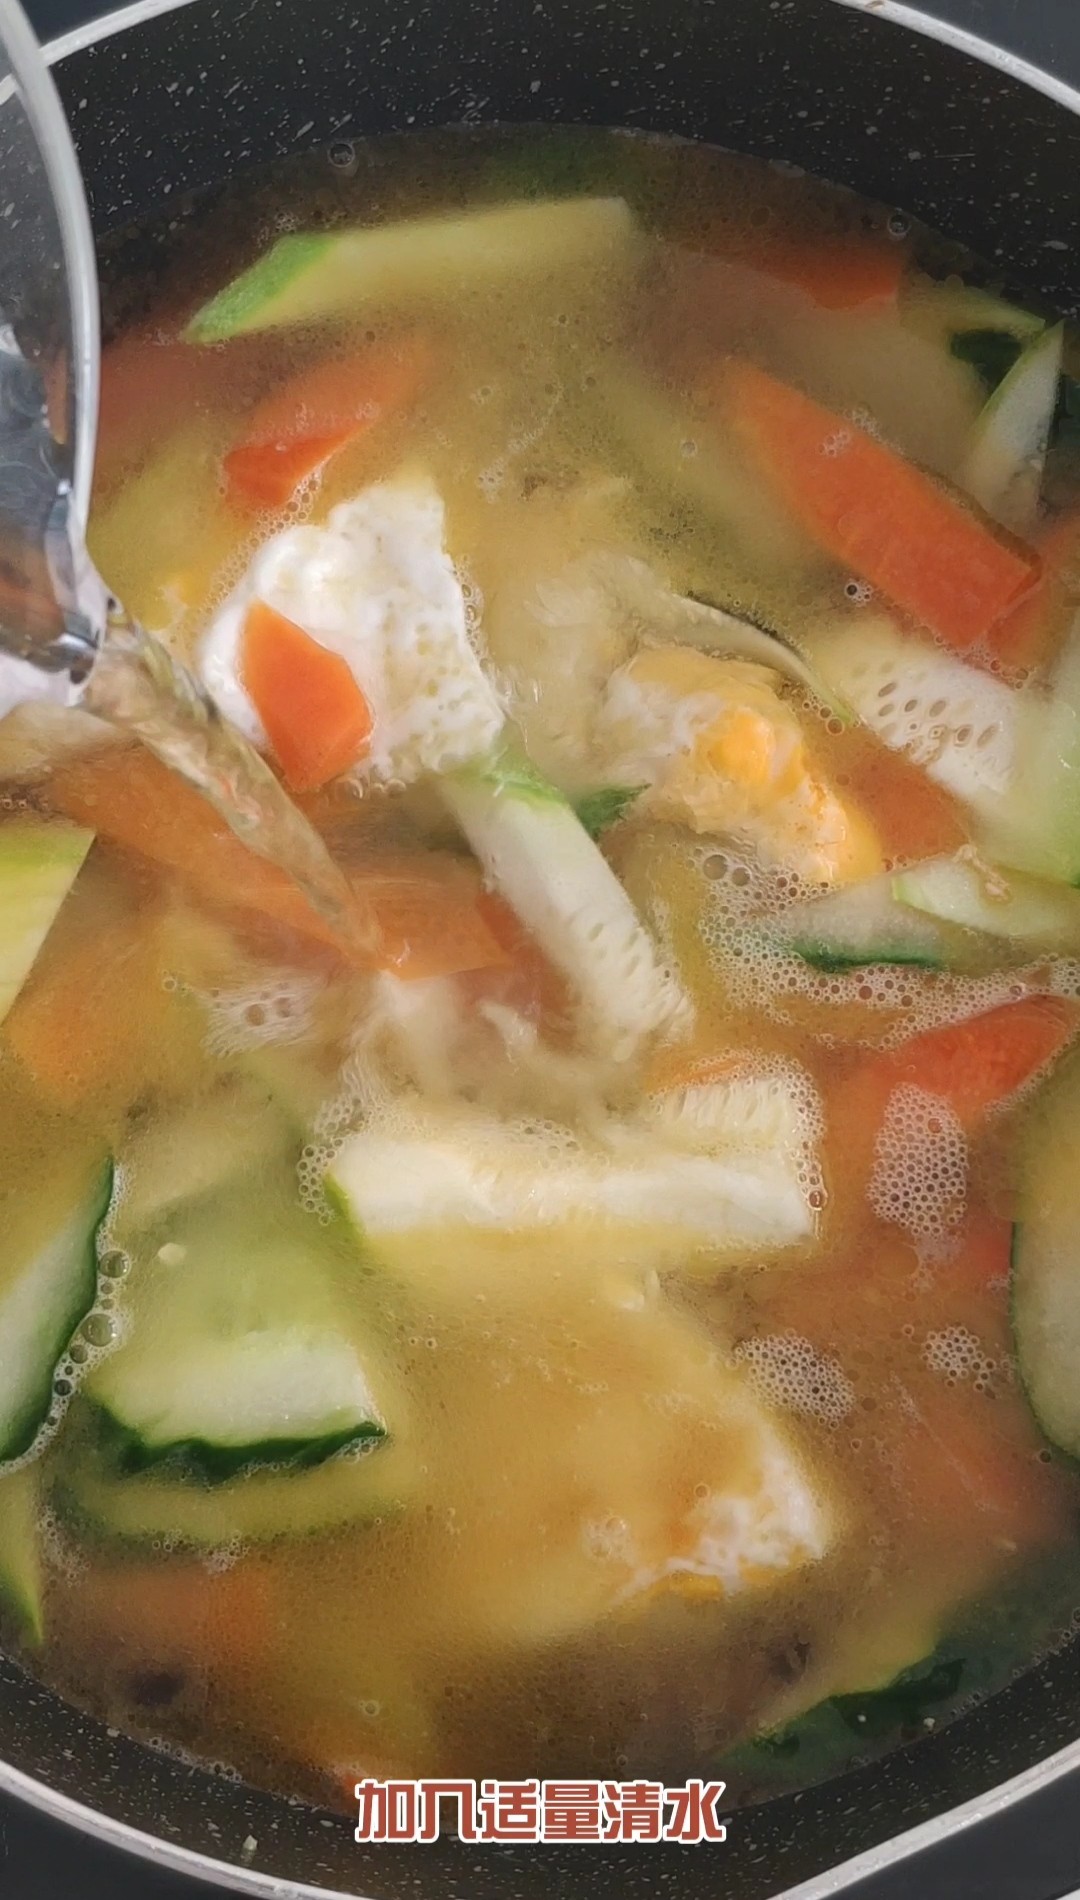 Mixed Vegetable Soup with Egg recipe